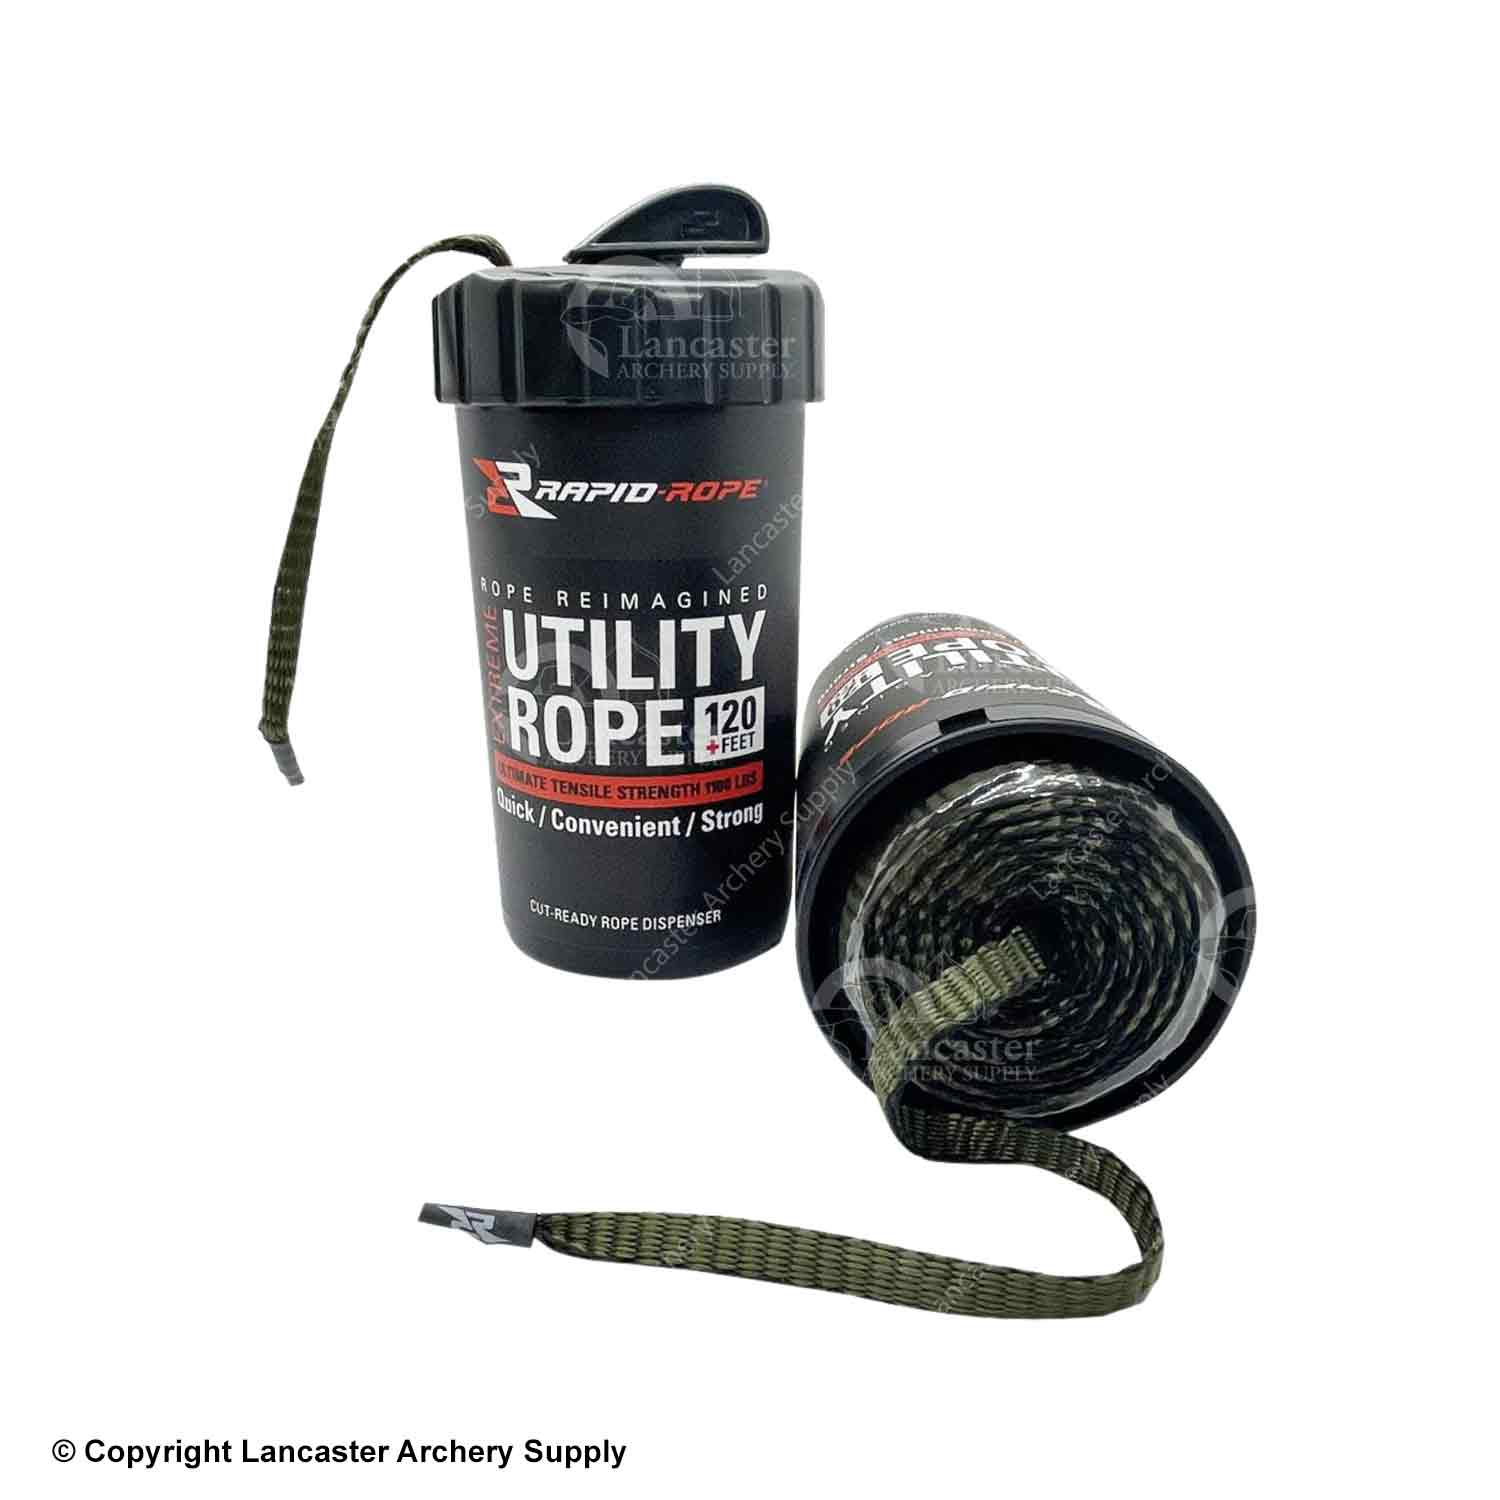 Rapid Rope Canisters Rope in a Can (120 Feet, 1100 lb Test)